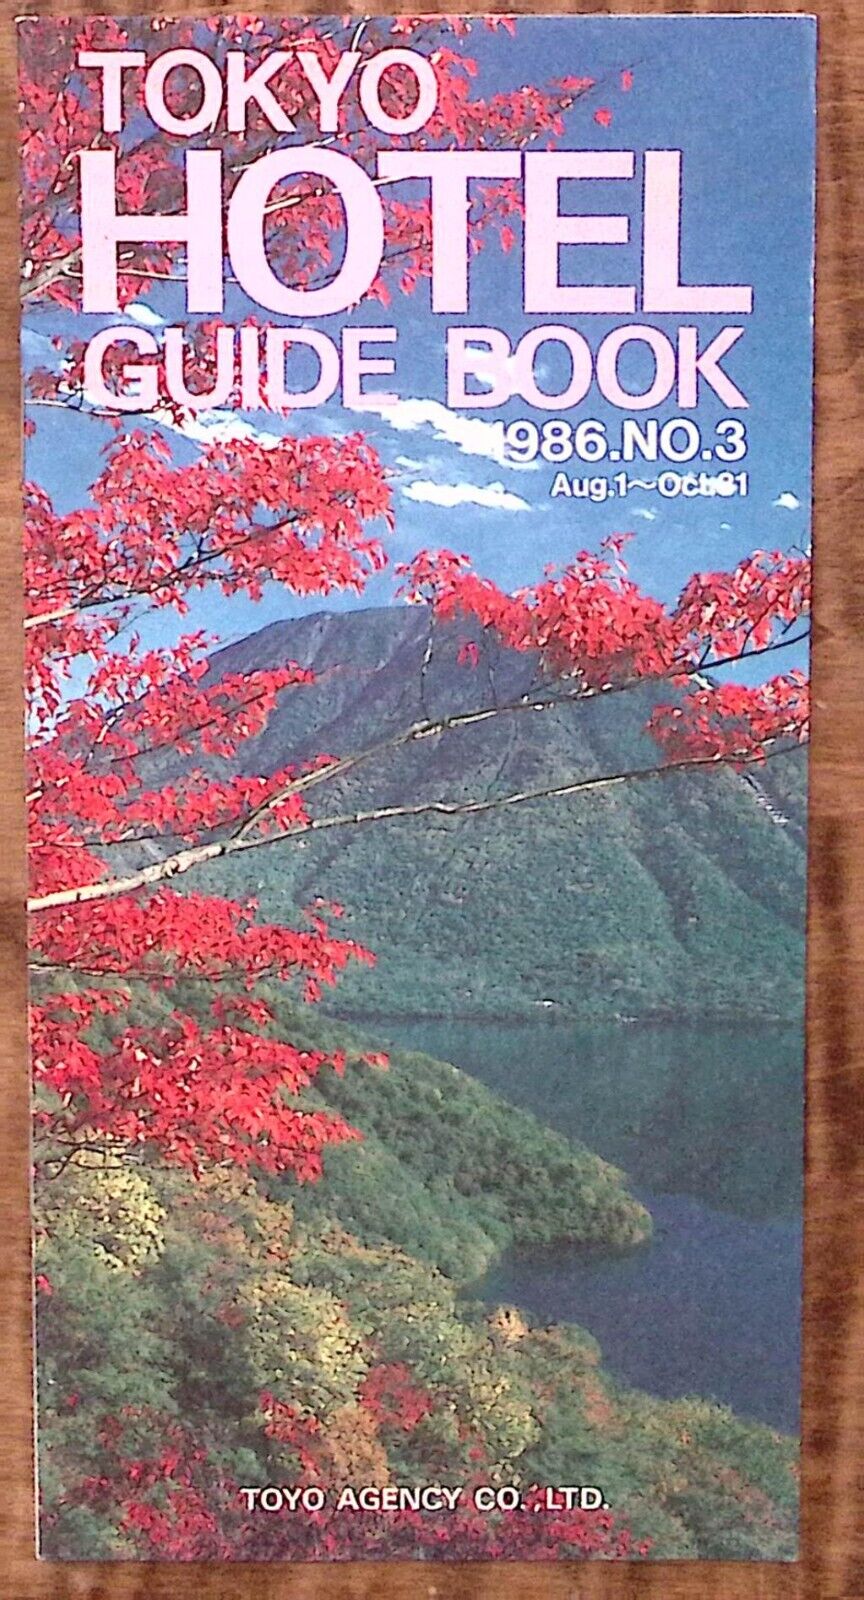 1986 TOKYO JAPAN HOTEL GUIDE BOOK NO 3 AUG1-OCT31 TOYO AGENCY CO.  Z4757